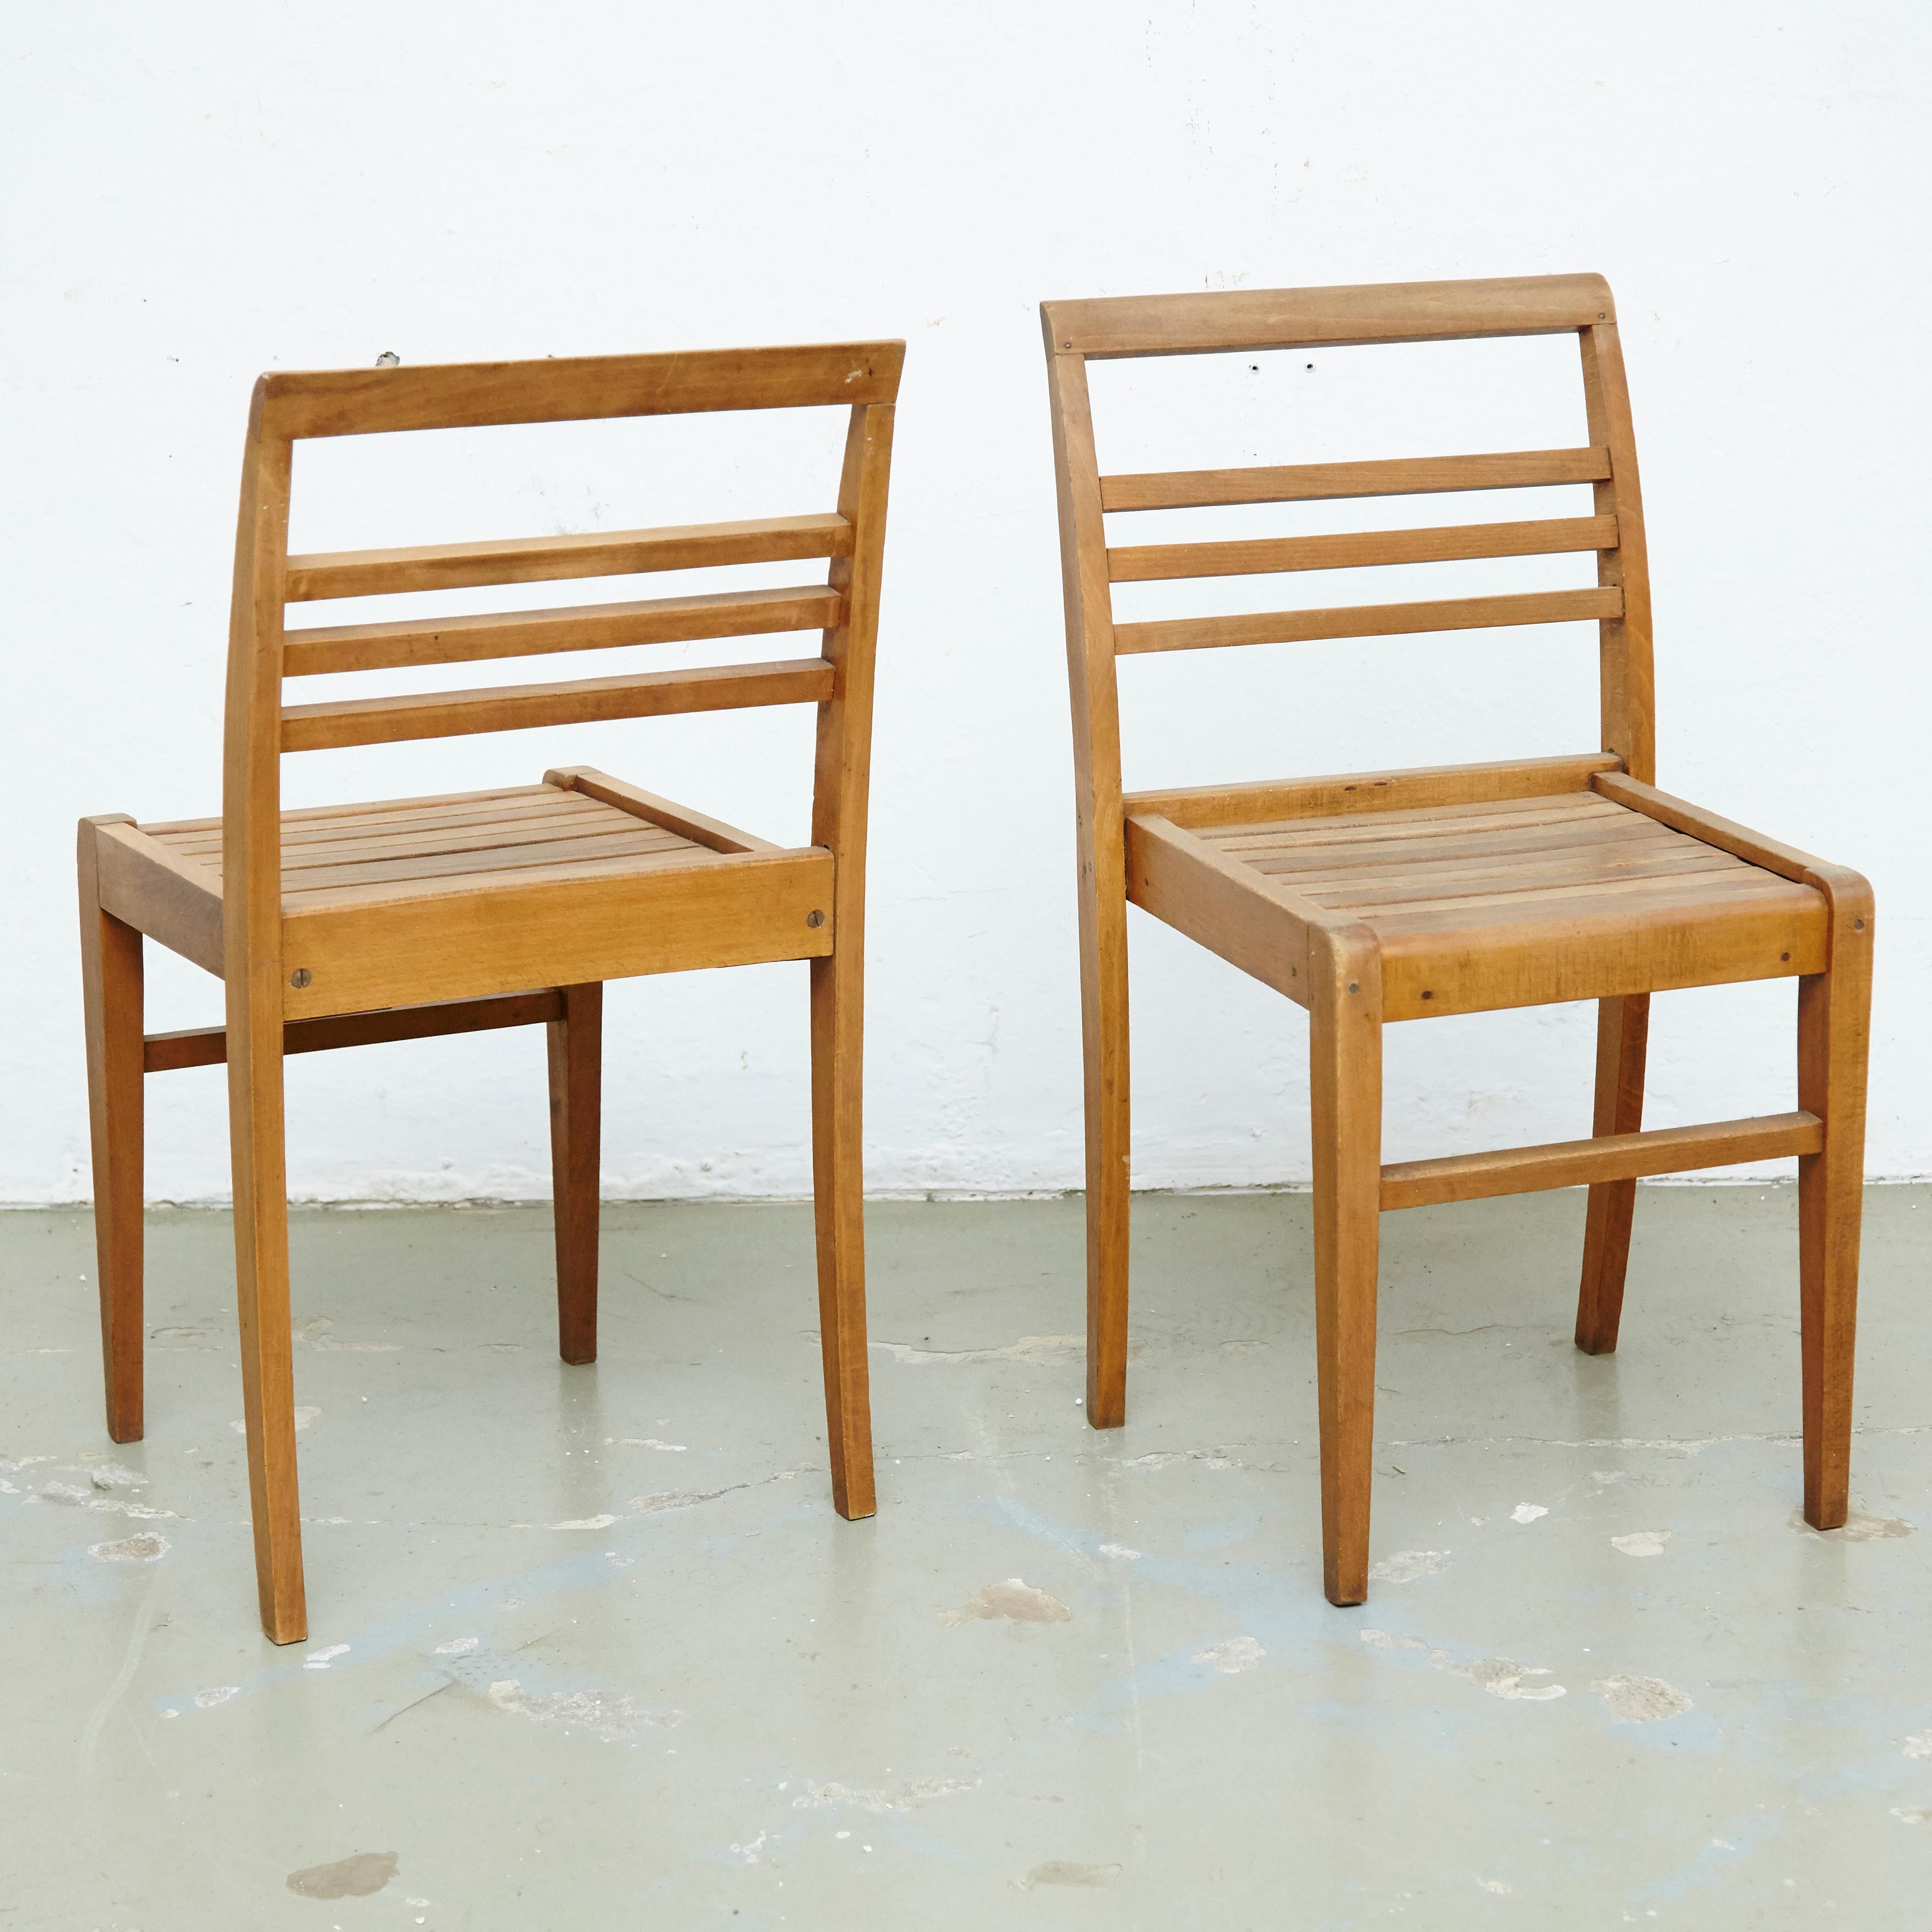 Mid-20th Century Pair of Chairs by Rene Gabriel Wood, circa 1940